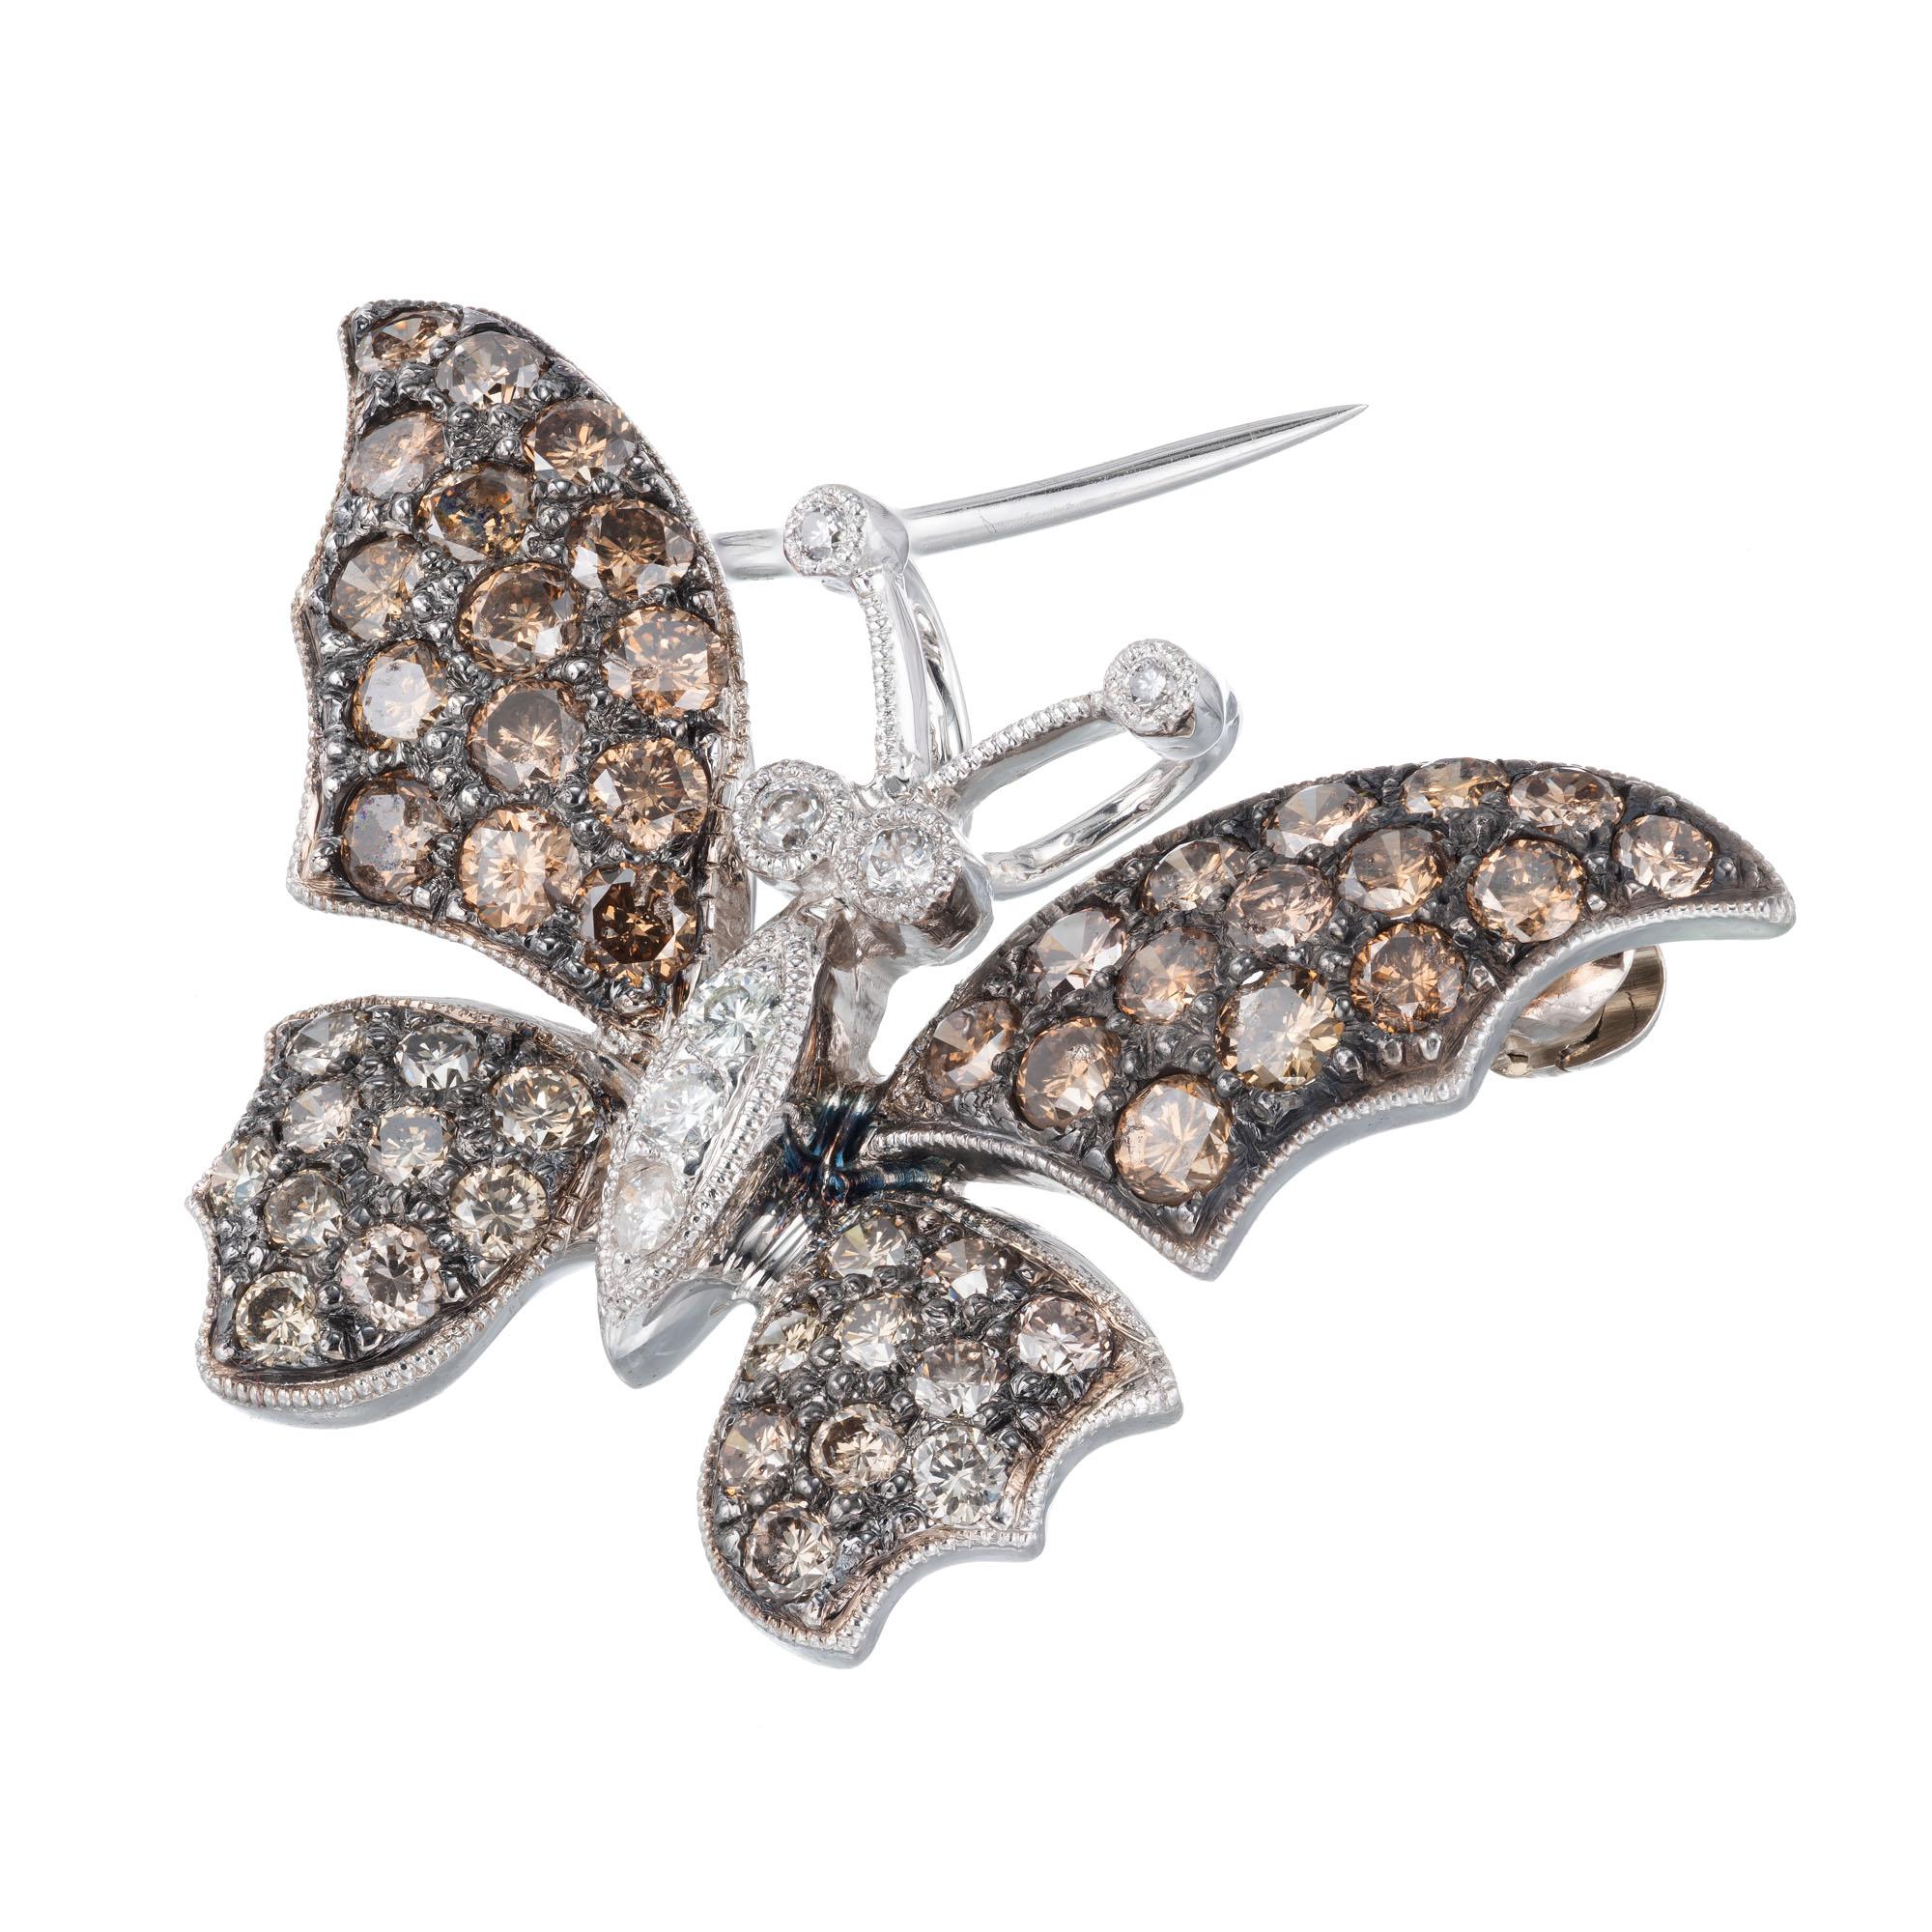 Brown and white diamond Butterfly brooch pendant. Golden brown diamond wings with a white diamond body in 18k white gold. 

7 round white diamonds, approx. total weight .08cts
50 round natural golden brown diamonds, approx. total weight 1.64cts, VS